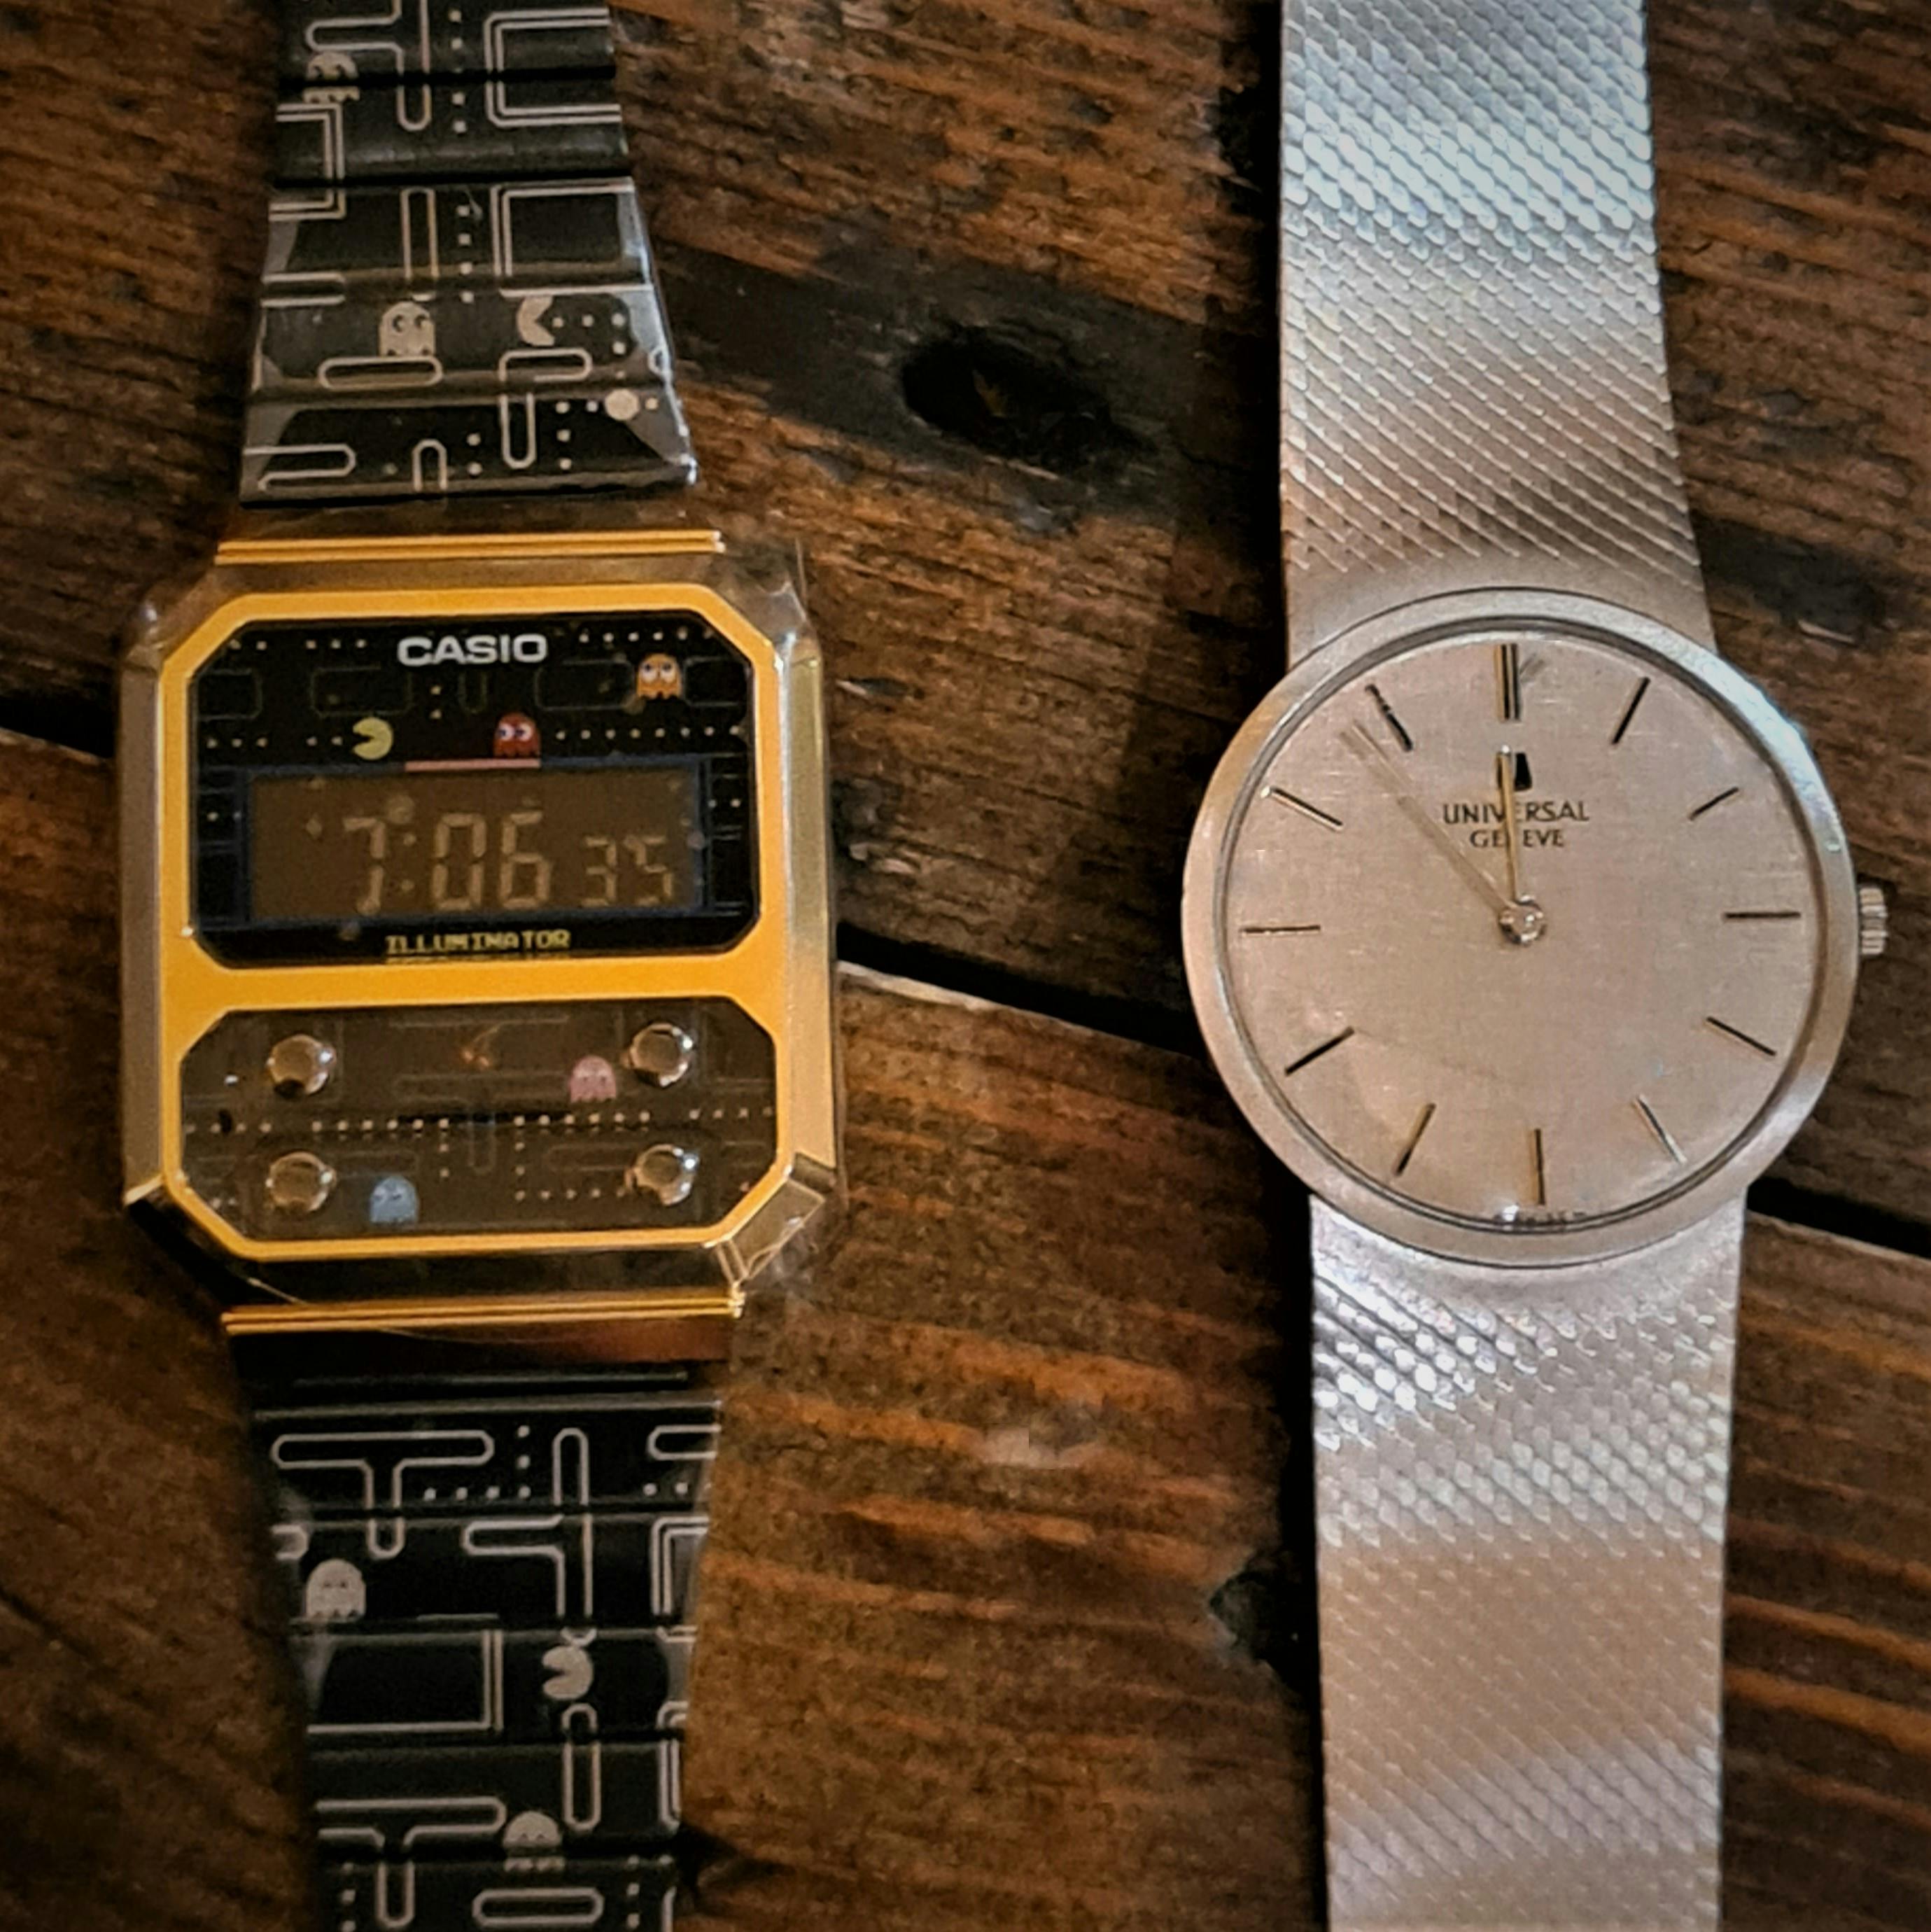 A Casio Pacman Digital watch and a Universale Geneve Dress watch